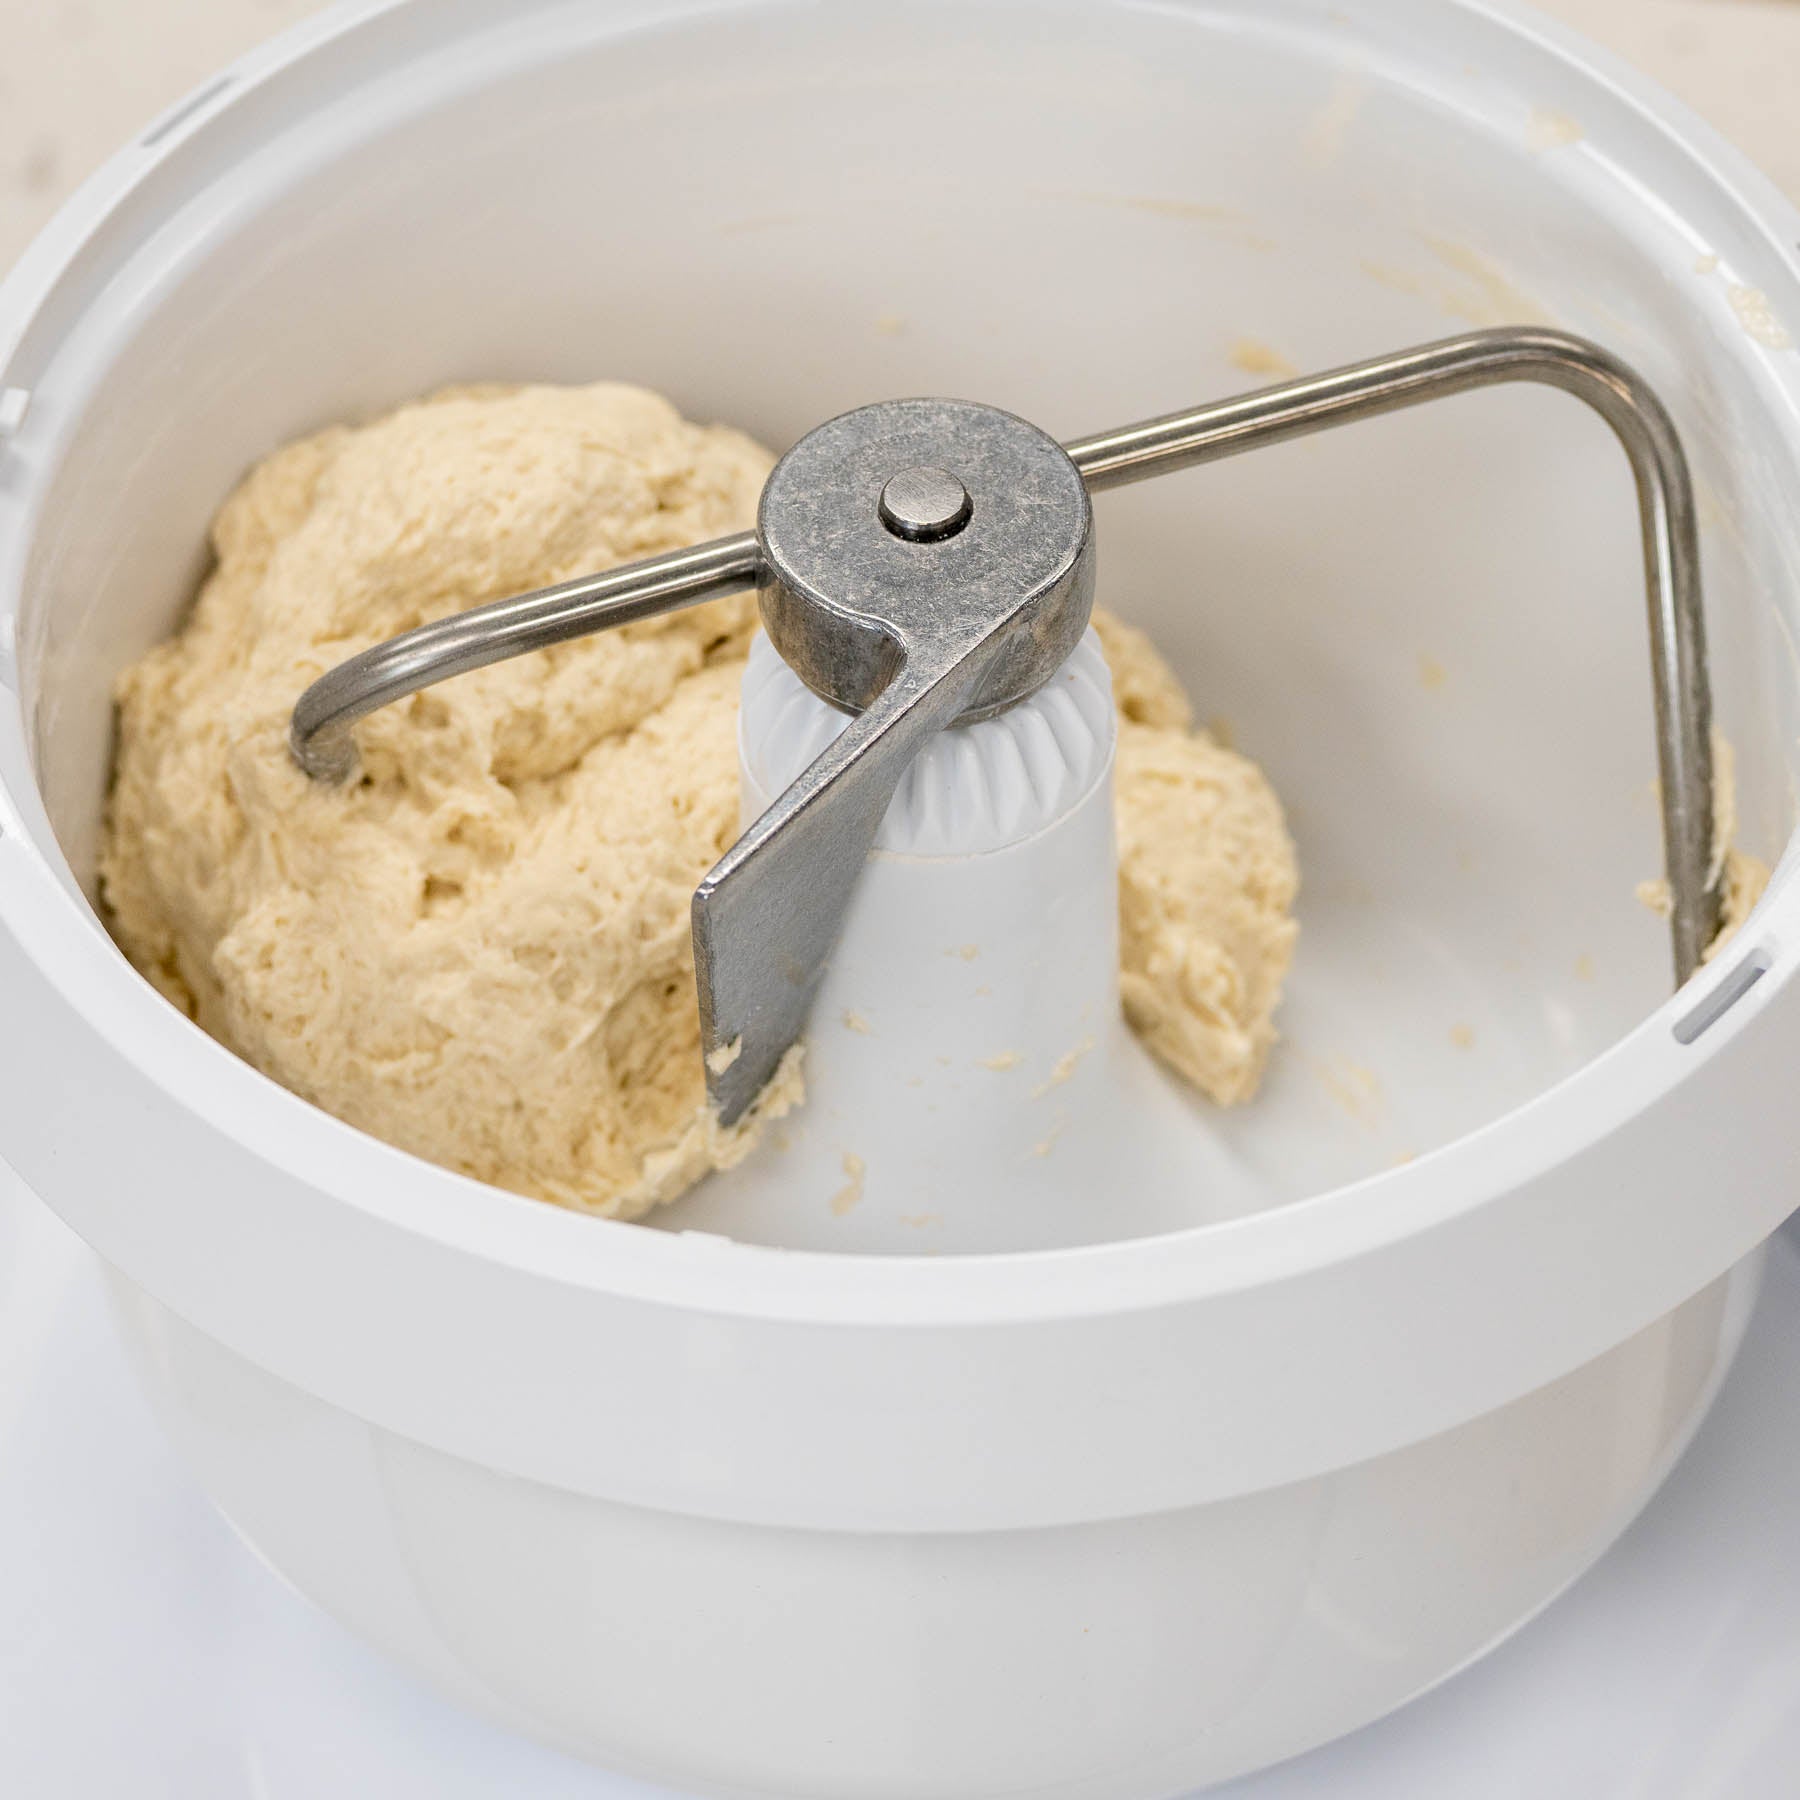 It's the base to a hand crank food processor. : r/thisisthatthing